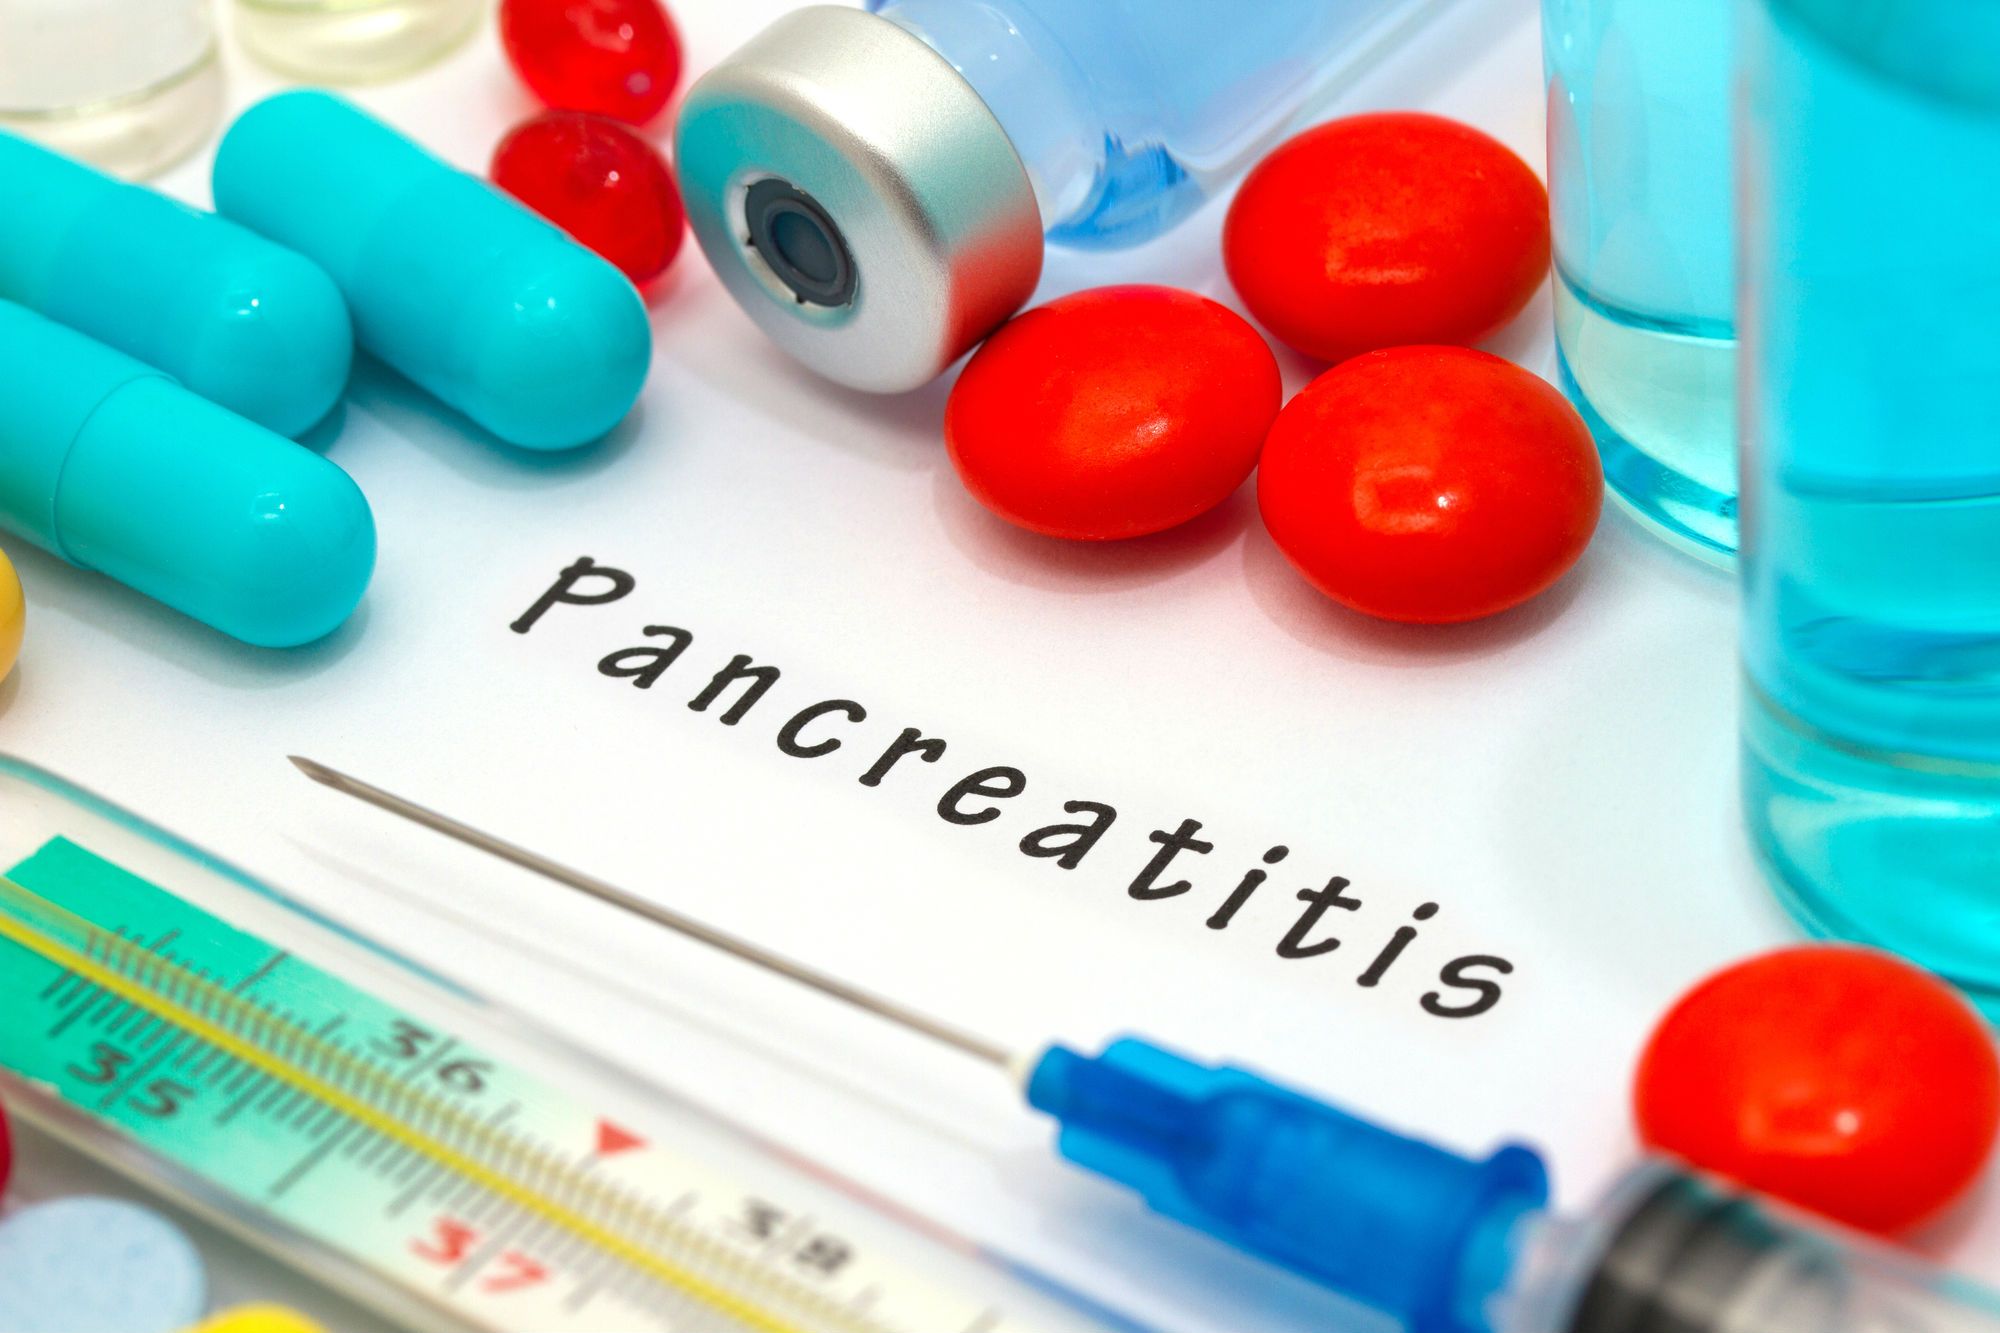 A new study indicates side effects of Onglyza may include an increased risk of pancreatitis and pancreatic cancer among patients with diabetes.